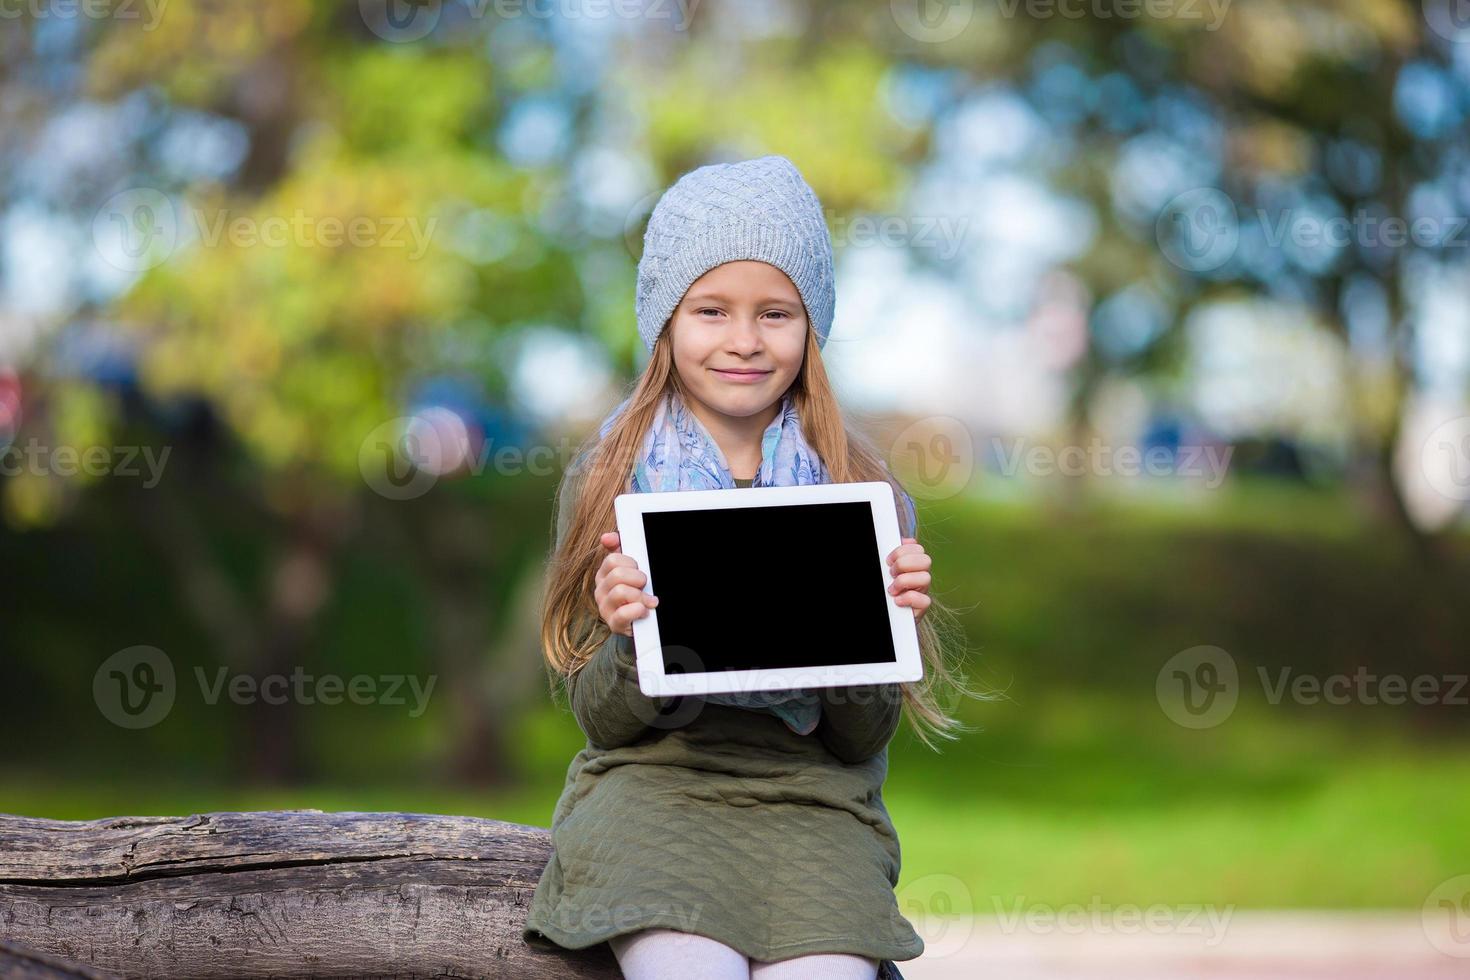 Adorable little girl holding tablet PC outdoors in autumn sunny day photo